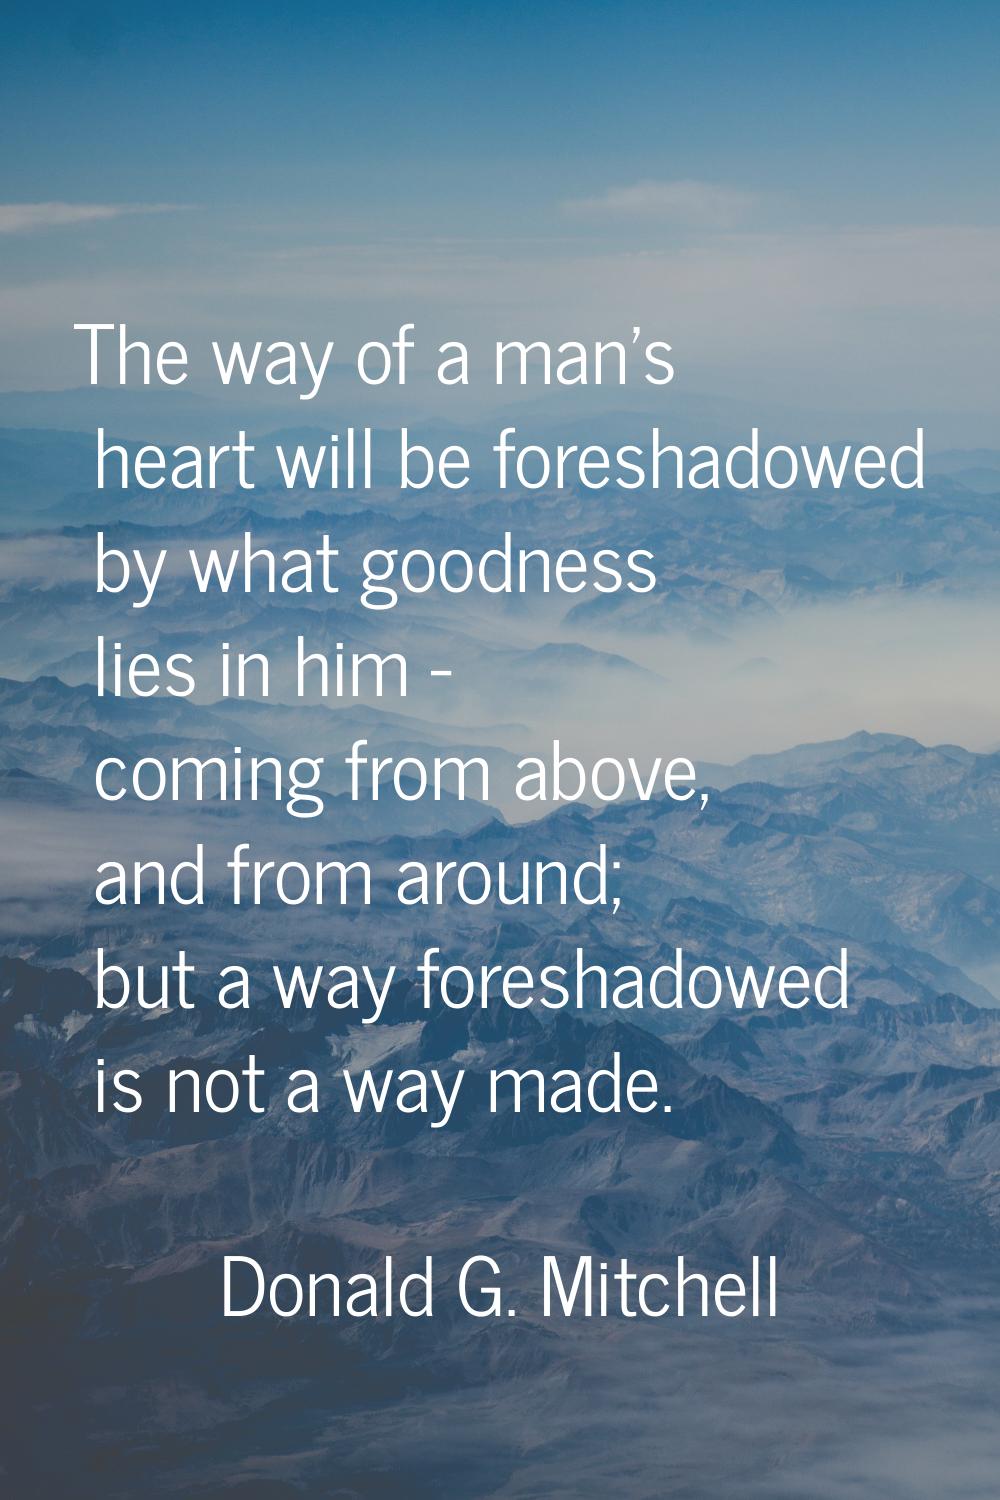 The way of a man's heart will be foreshadowed by what goodness lies in him - coming from above, and